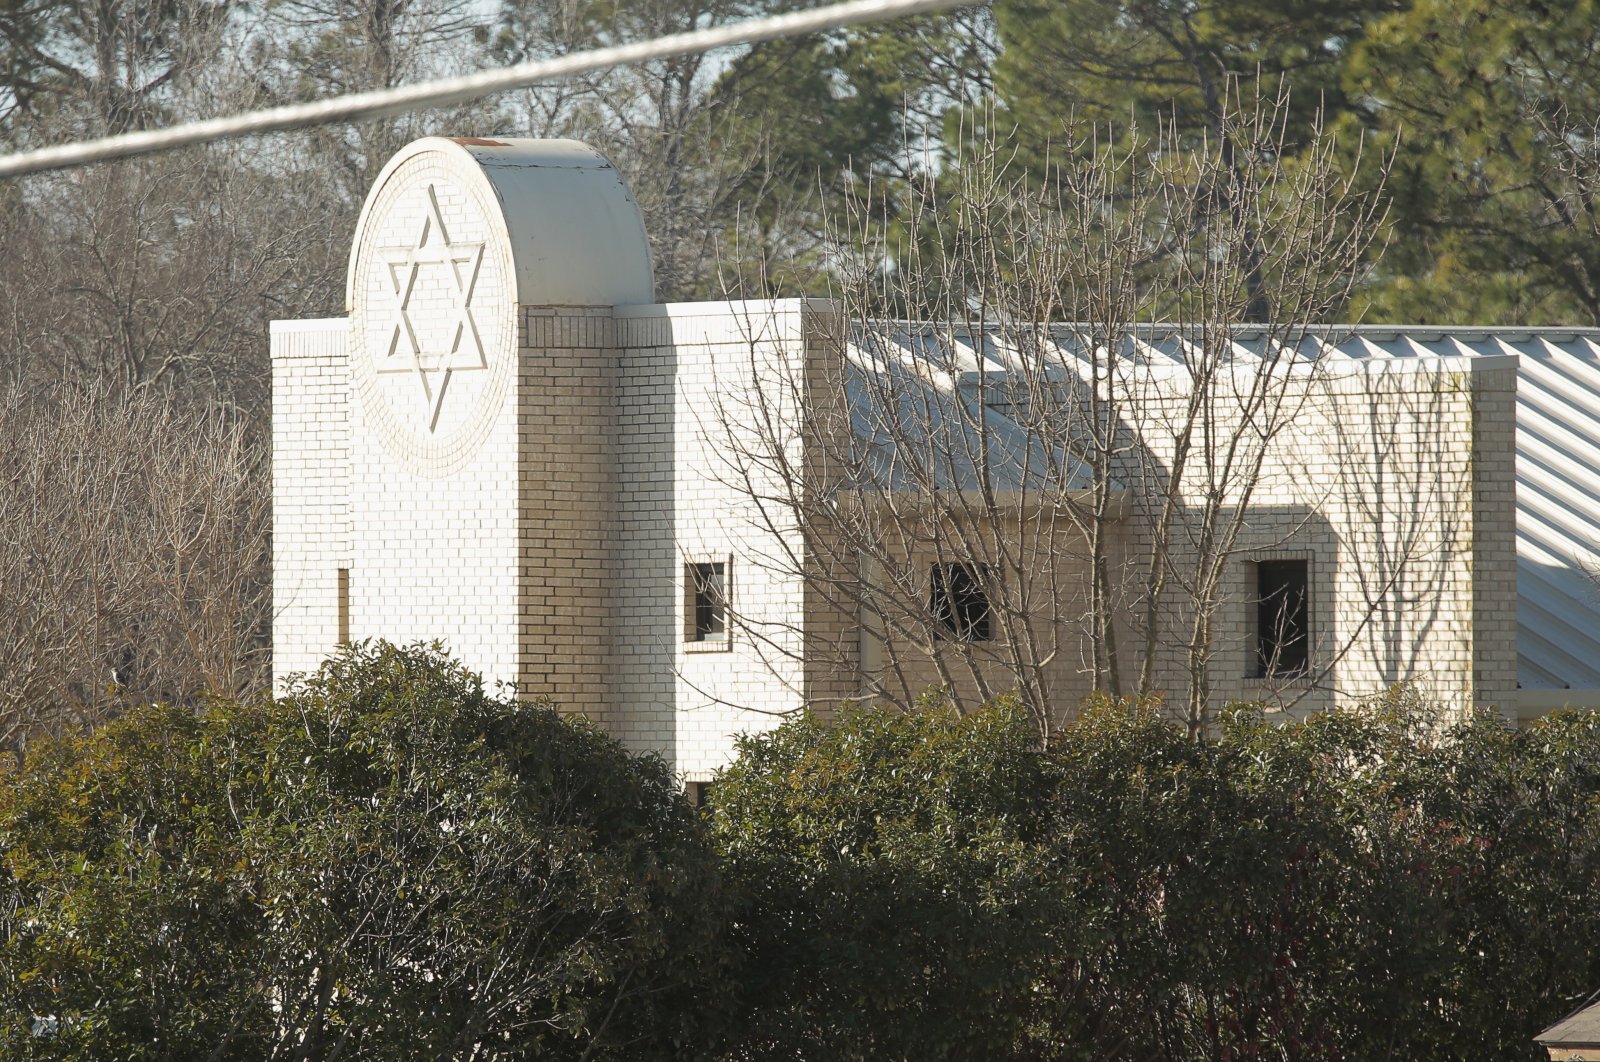  Law enforcement personnel continue the investigation of the hostage incident at Congregation Beth Israel Synagogue in Colleyville, Texas, U.S., Jan. 16, 2022. (EPA Photo)